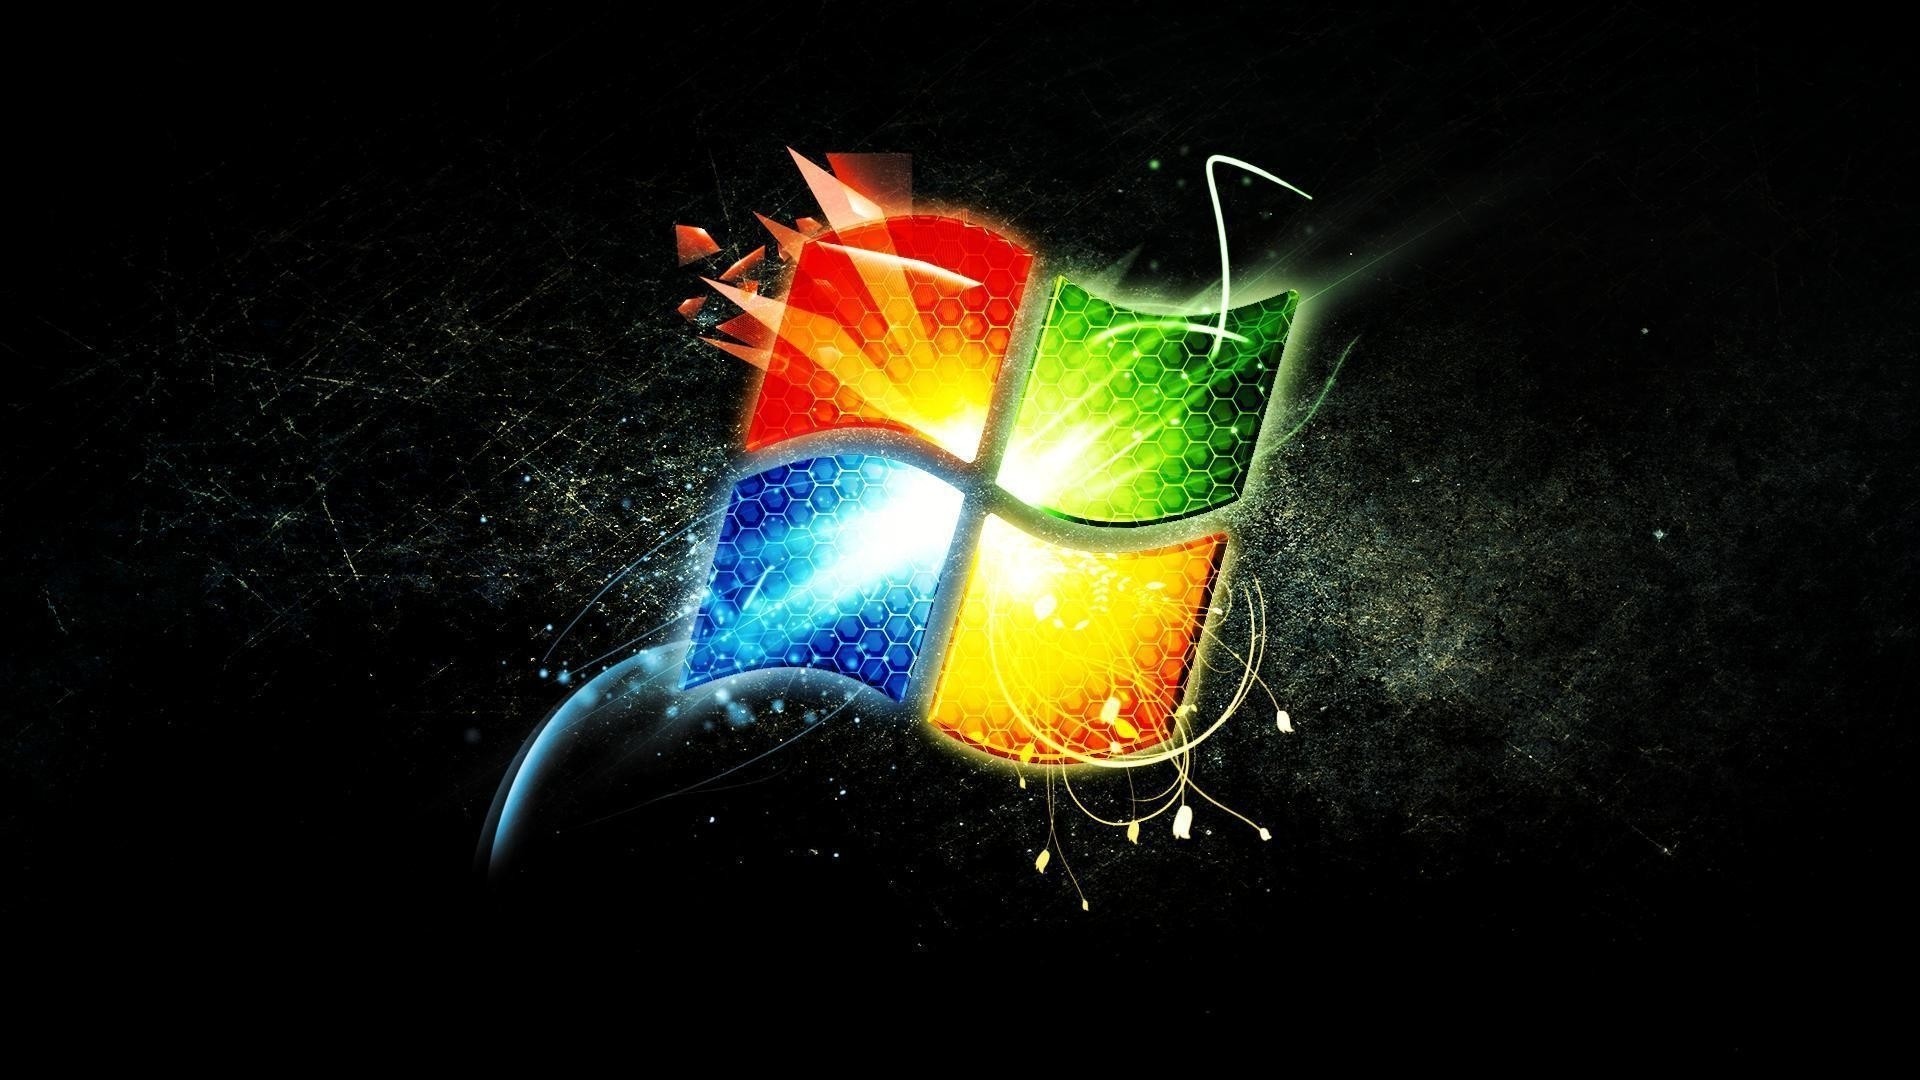 1920x1080 10 Latest Gif Wallpaper Windows 7 FULL HD 1080p For PC Background